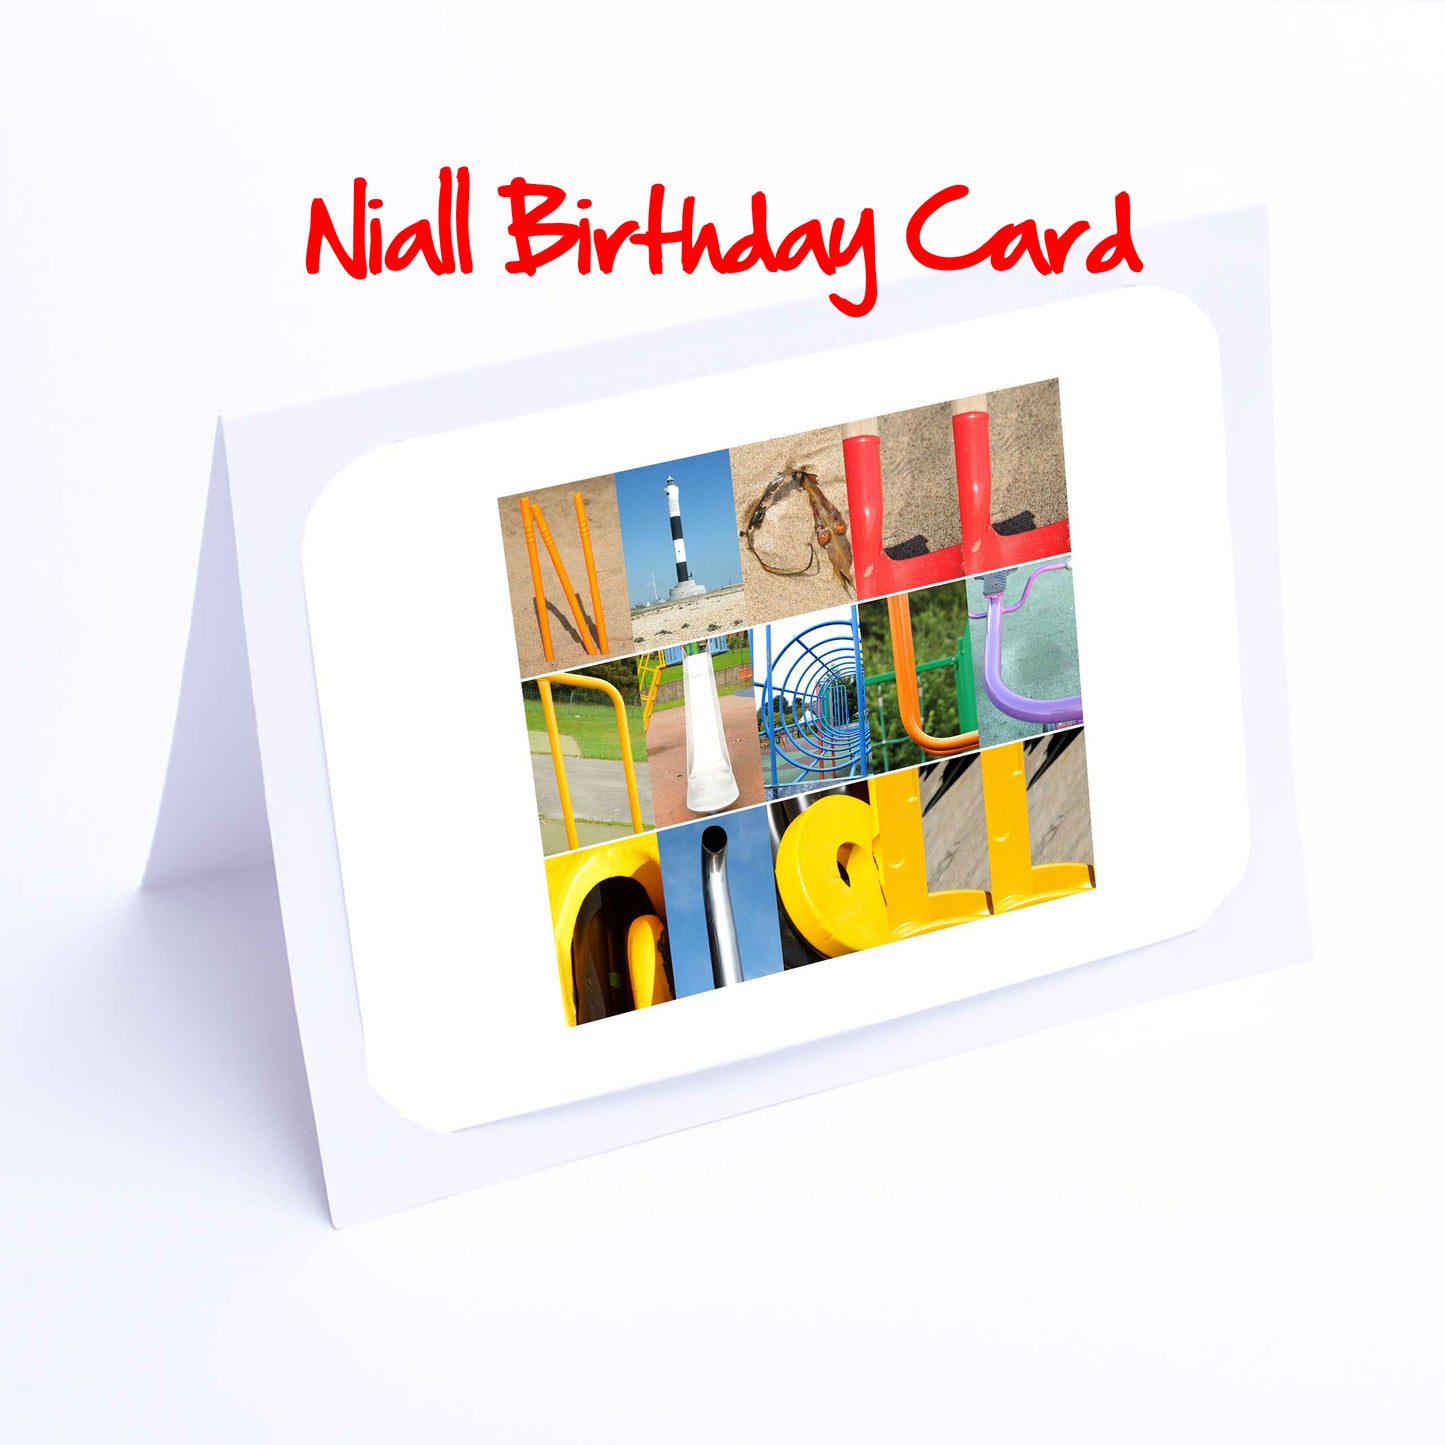 Nat - Owe Boys Personalised Card - Nathan, Neal, Niall, Nick, Noah, Oliver, Ollie, Oscar, Owen  Any name - Personalised Birthday Card